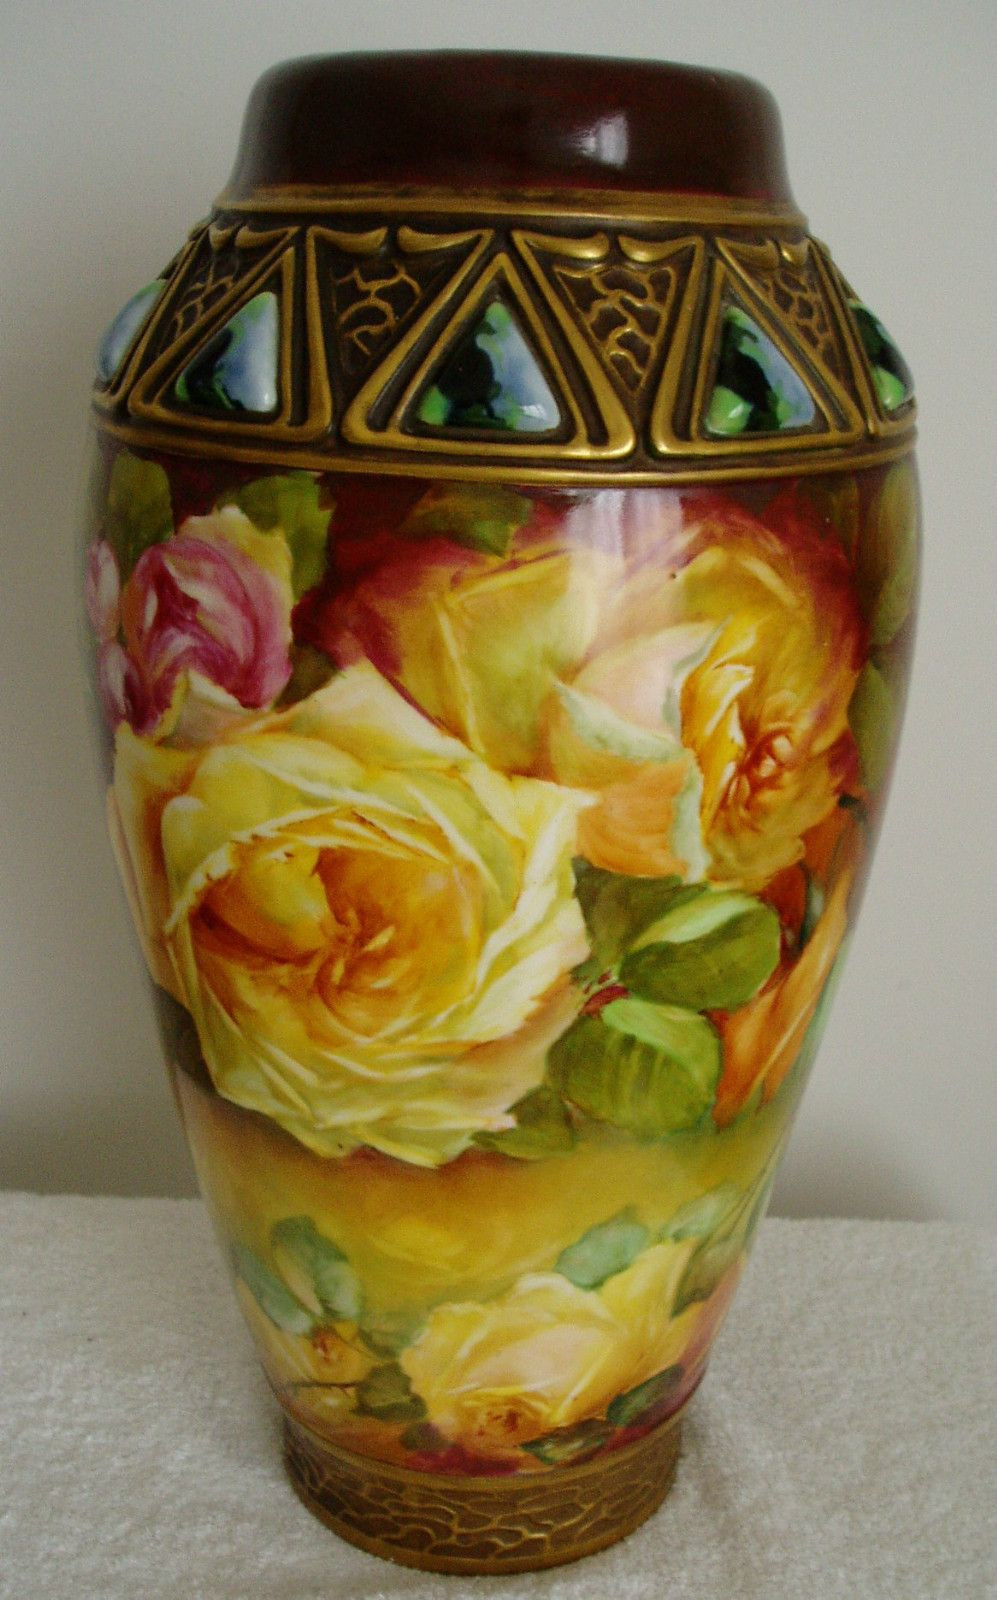 25 Fashionable Large Roseville Vase 2023 free download large roseville vase of habsburg austria vintage large art pottery vase hand painted roses with regard to habsburg austria vintage large art pottery vase hand painted roses ebay